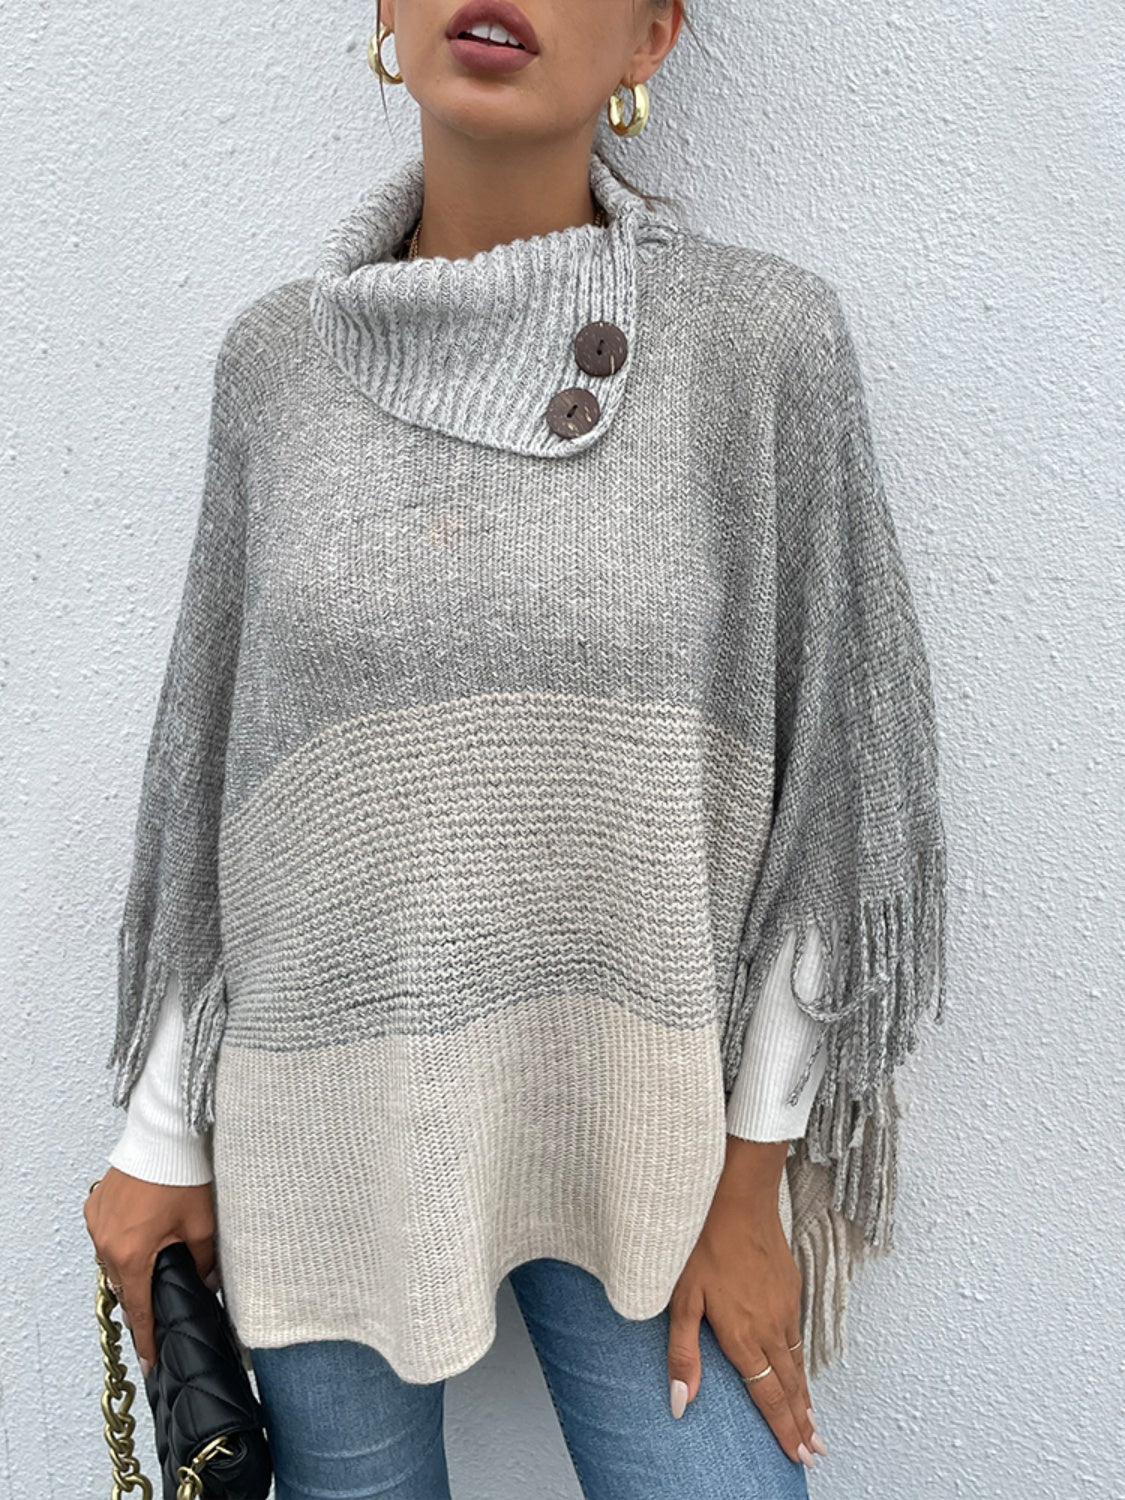 KHD Color Block Fringed Sweater Shawl  Krazy Heart Designs Boutique Light Gray S 